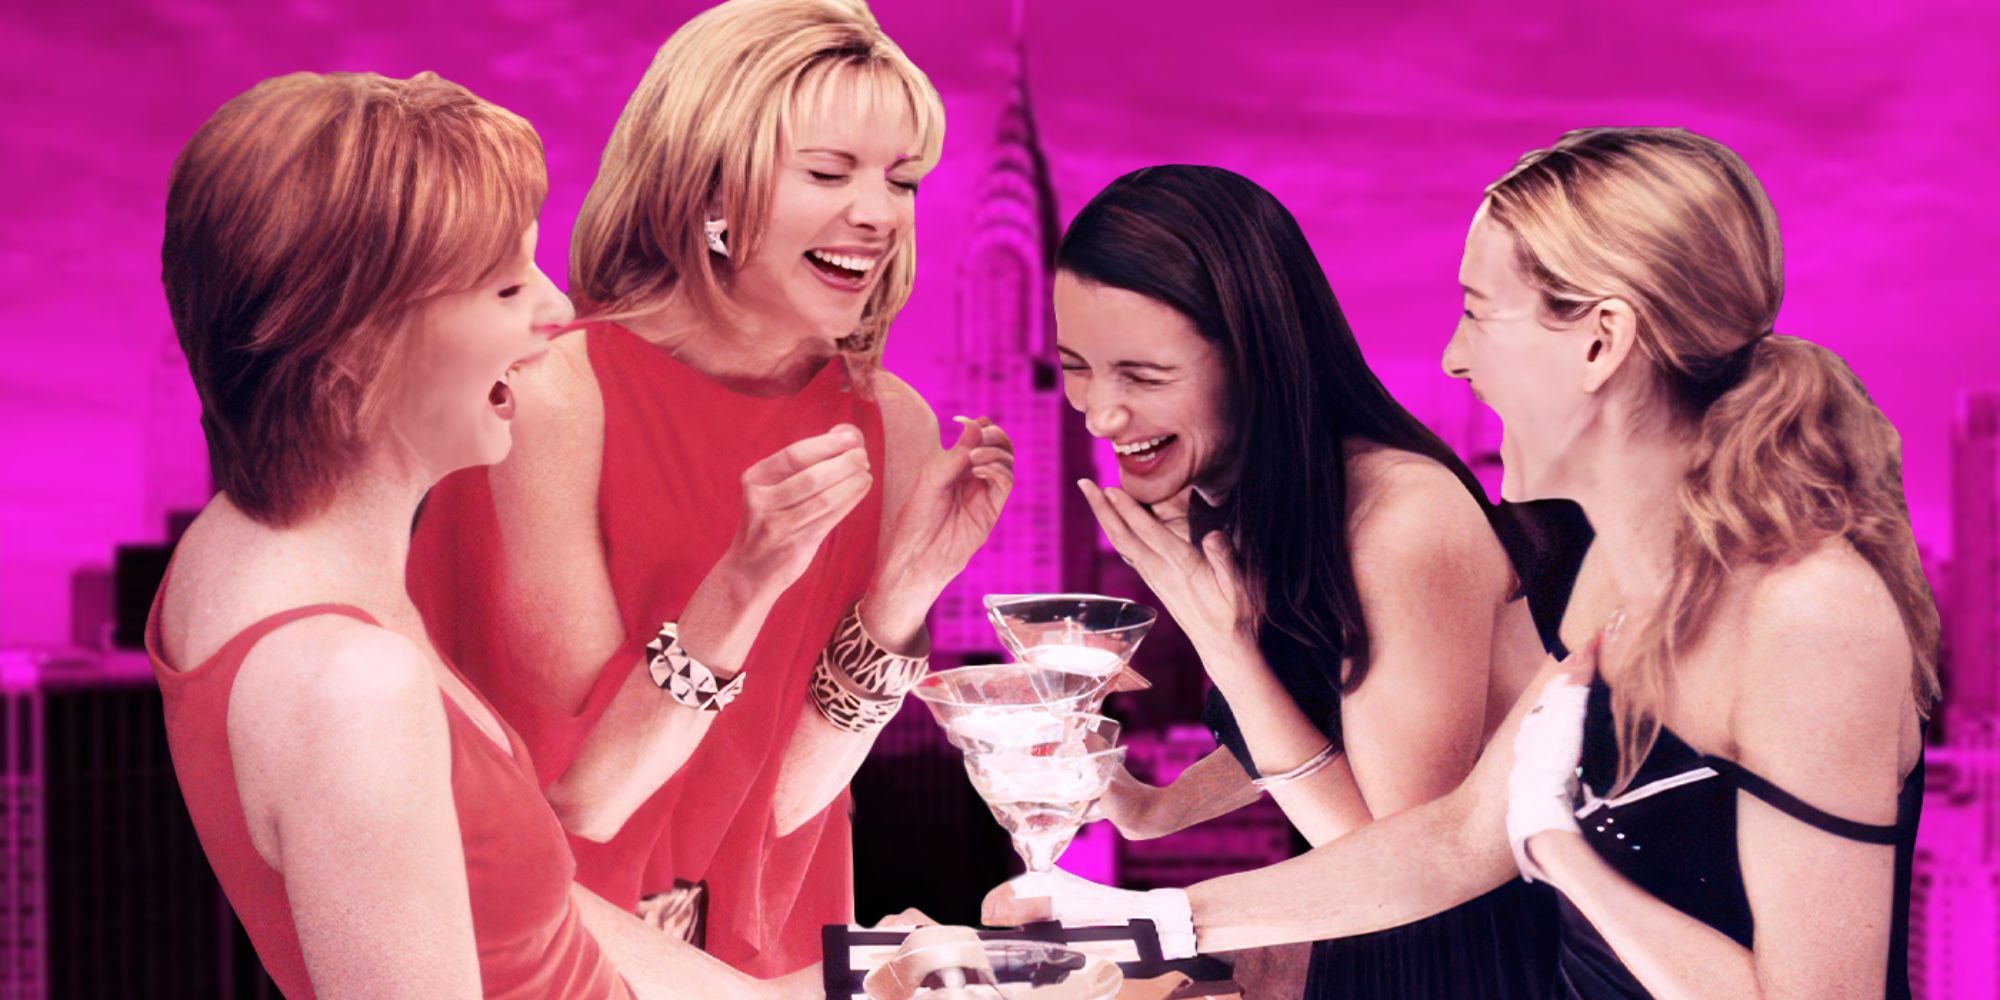 Custom image of the Sex and the City characters laughing